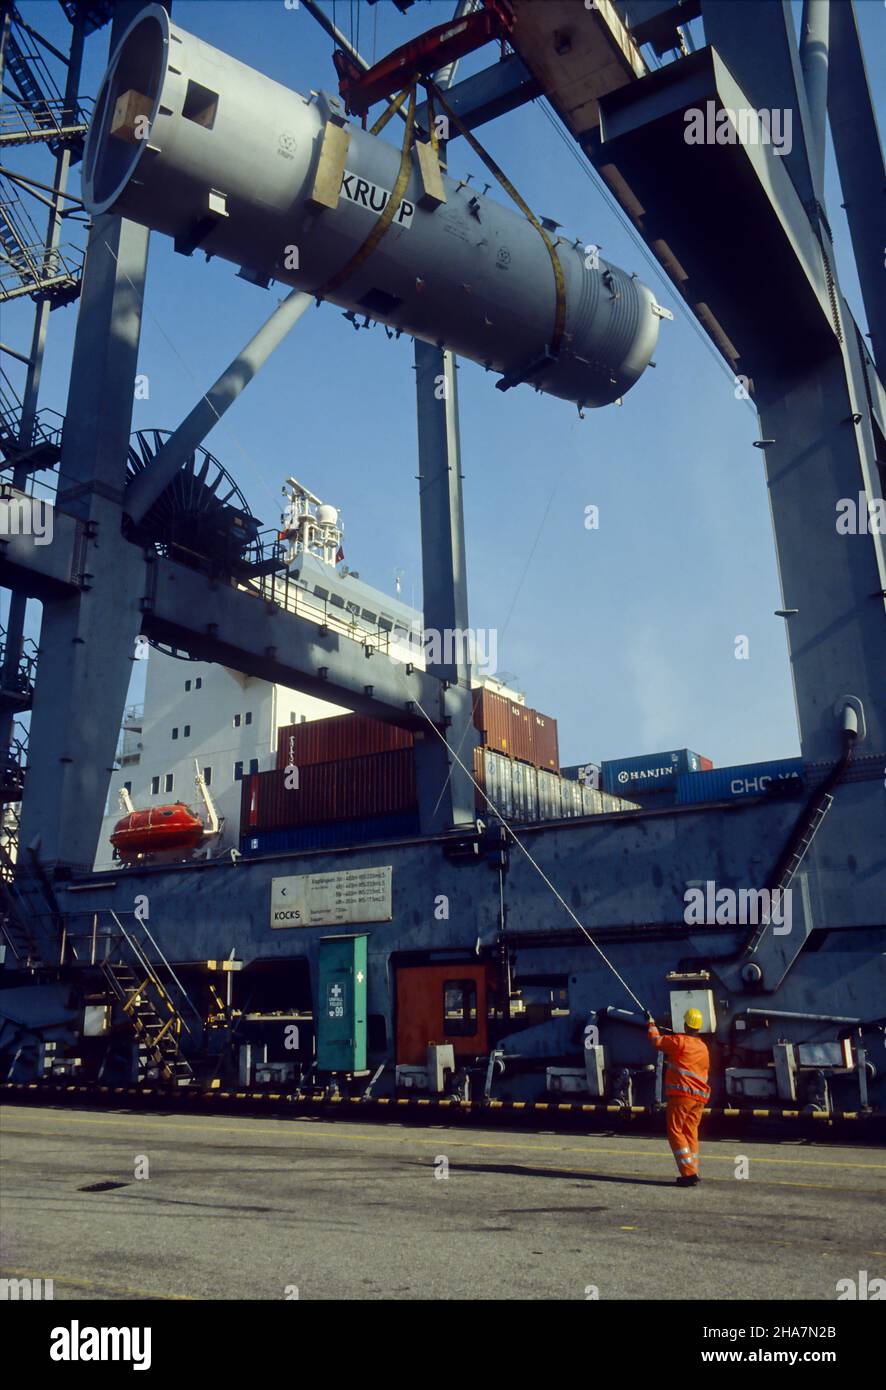 Heavy Plant Component, Boiler Tube, being lifted aboard a Container Vessel at Eurogate Container Terminal in the Port of Hamburg, Germany. Stock Photo